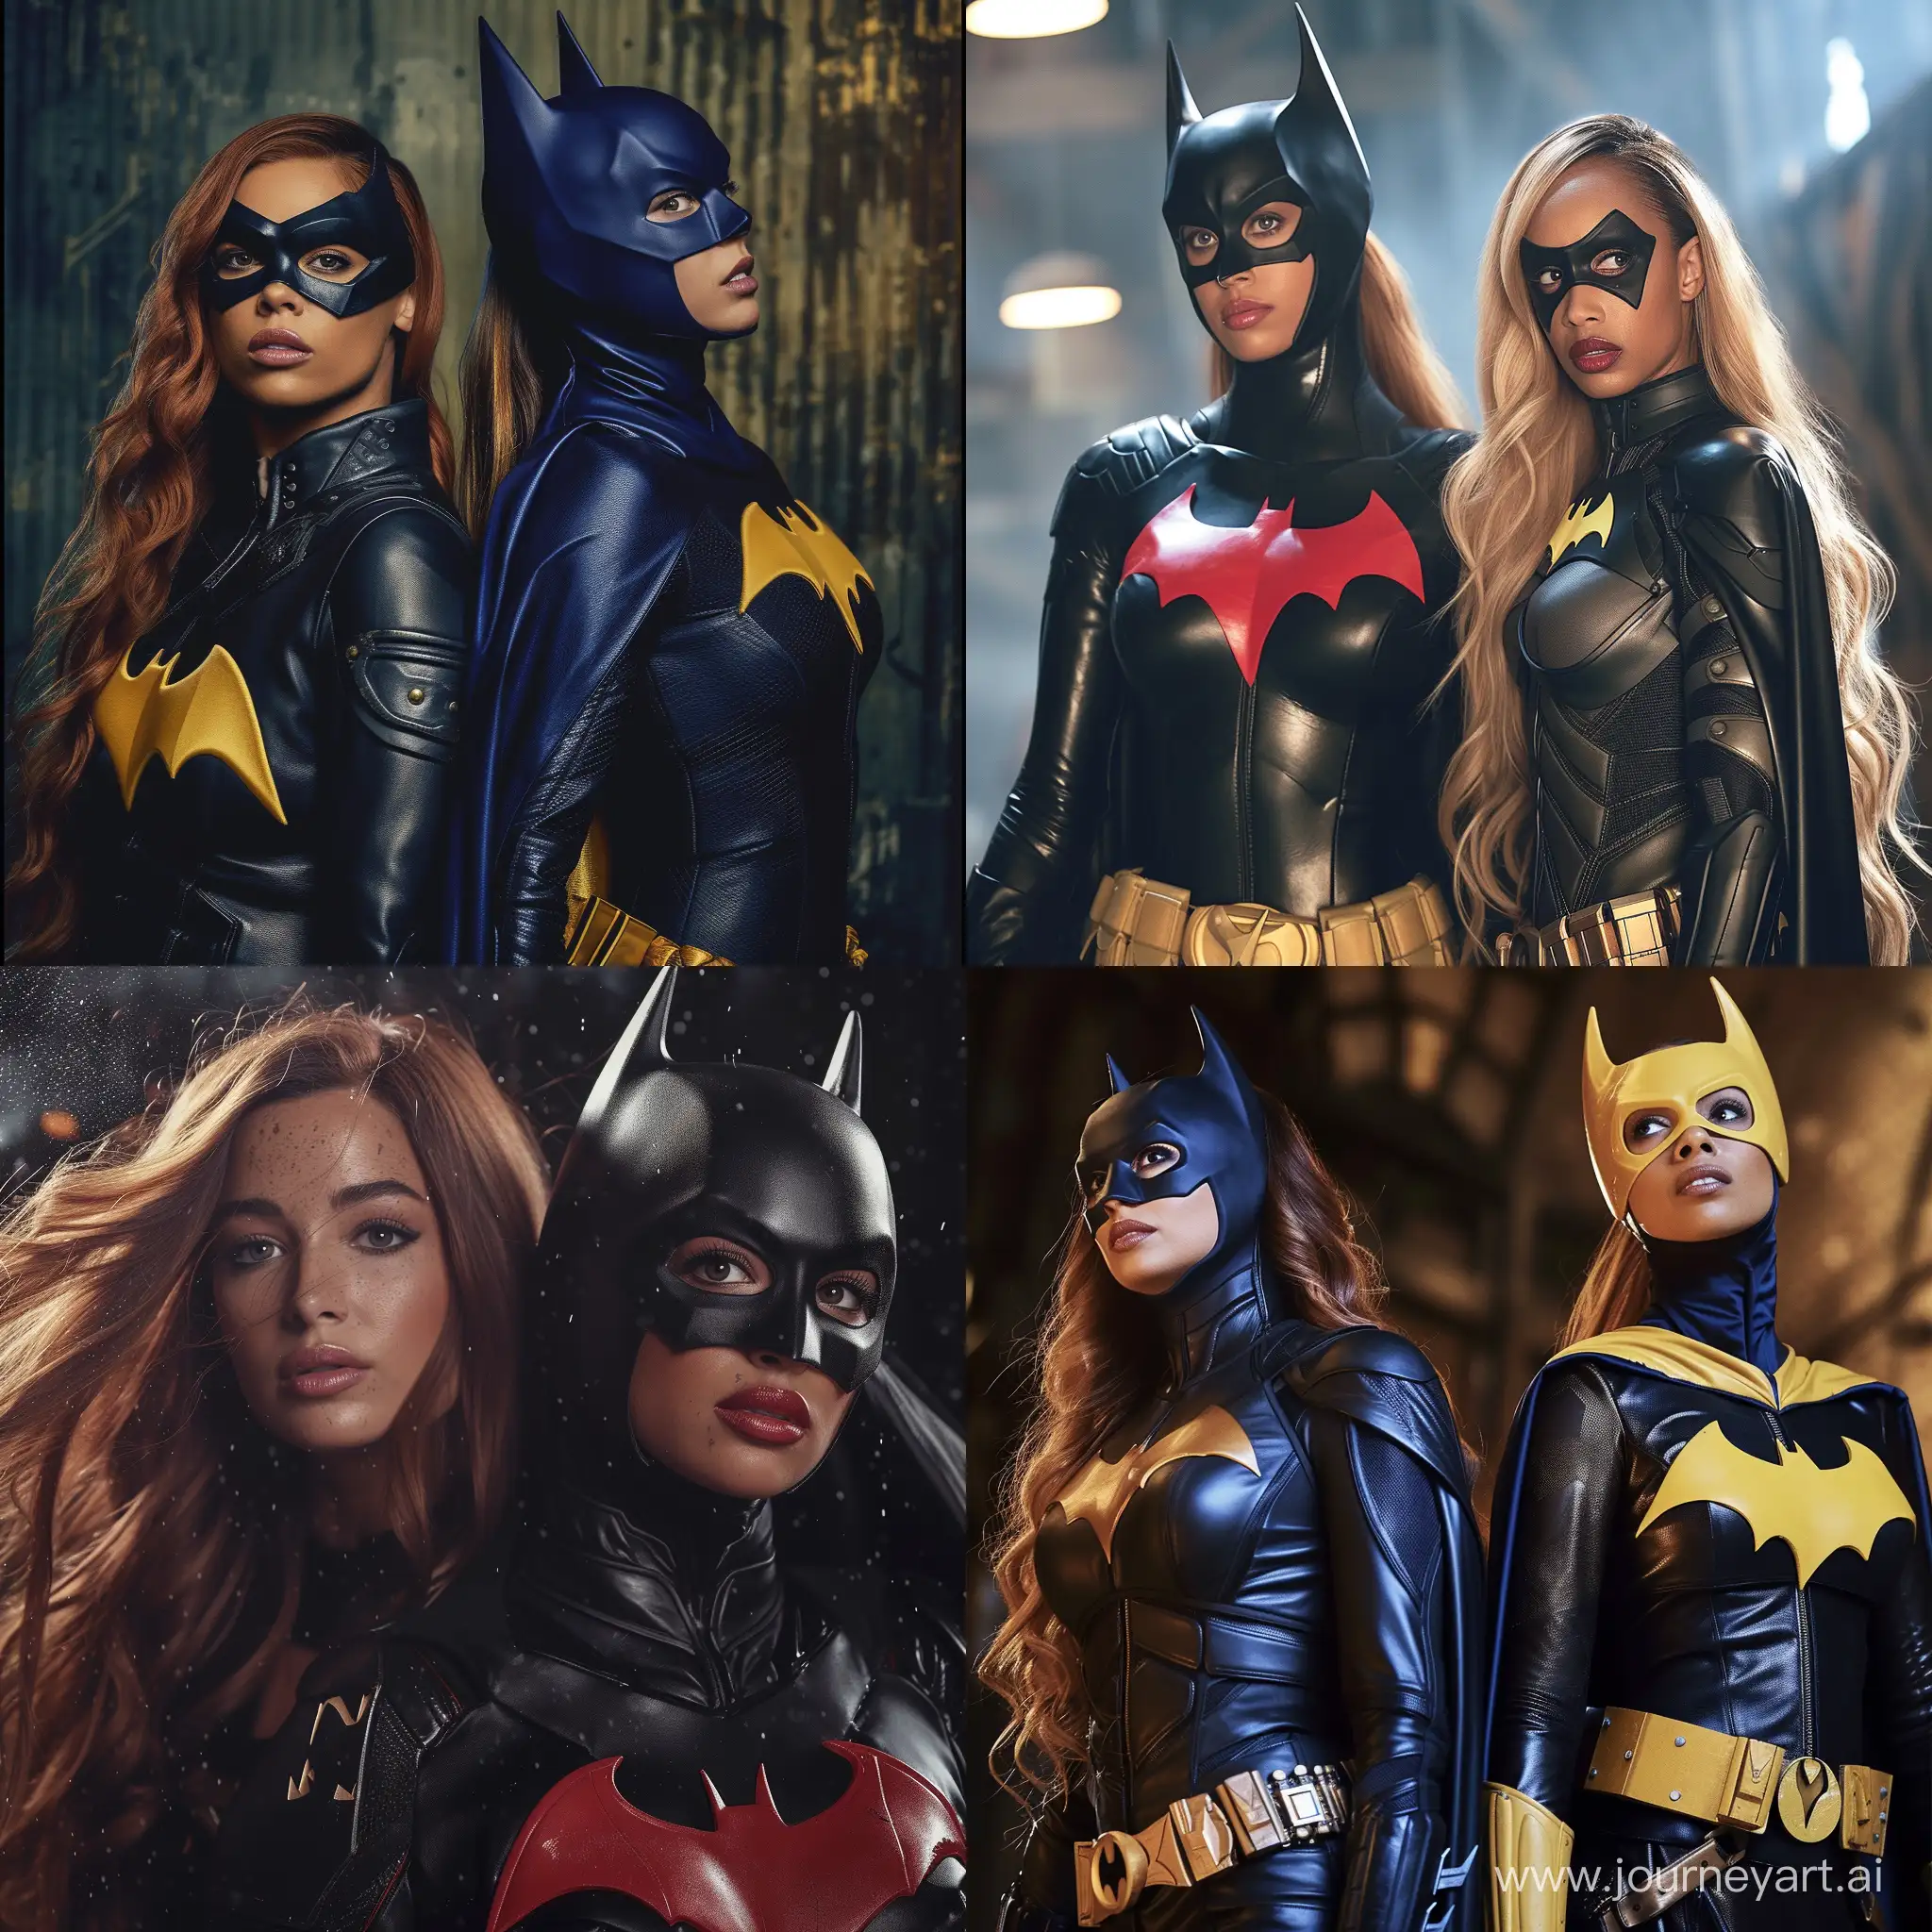 Ashley Tisdale and Erica Ash as Batgirl 